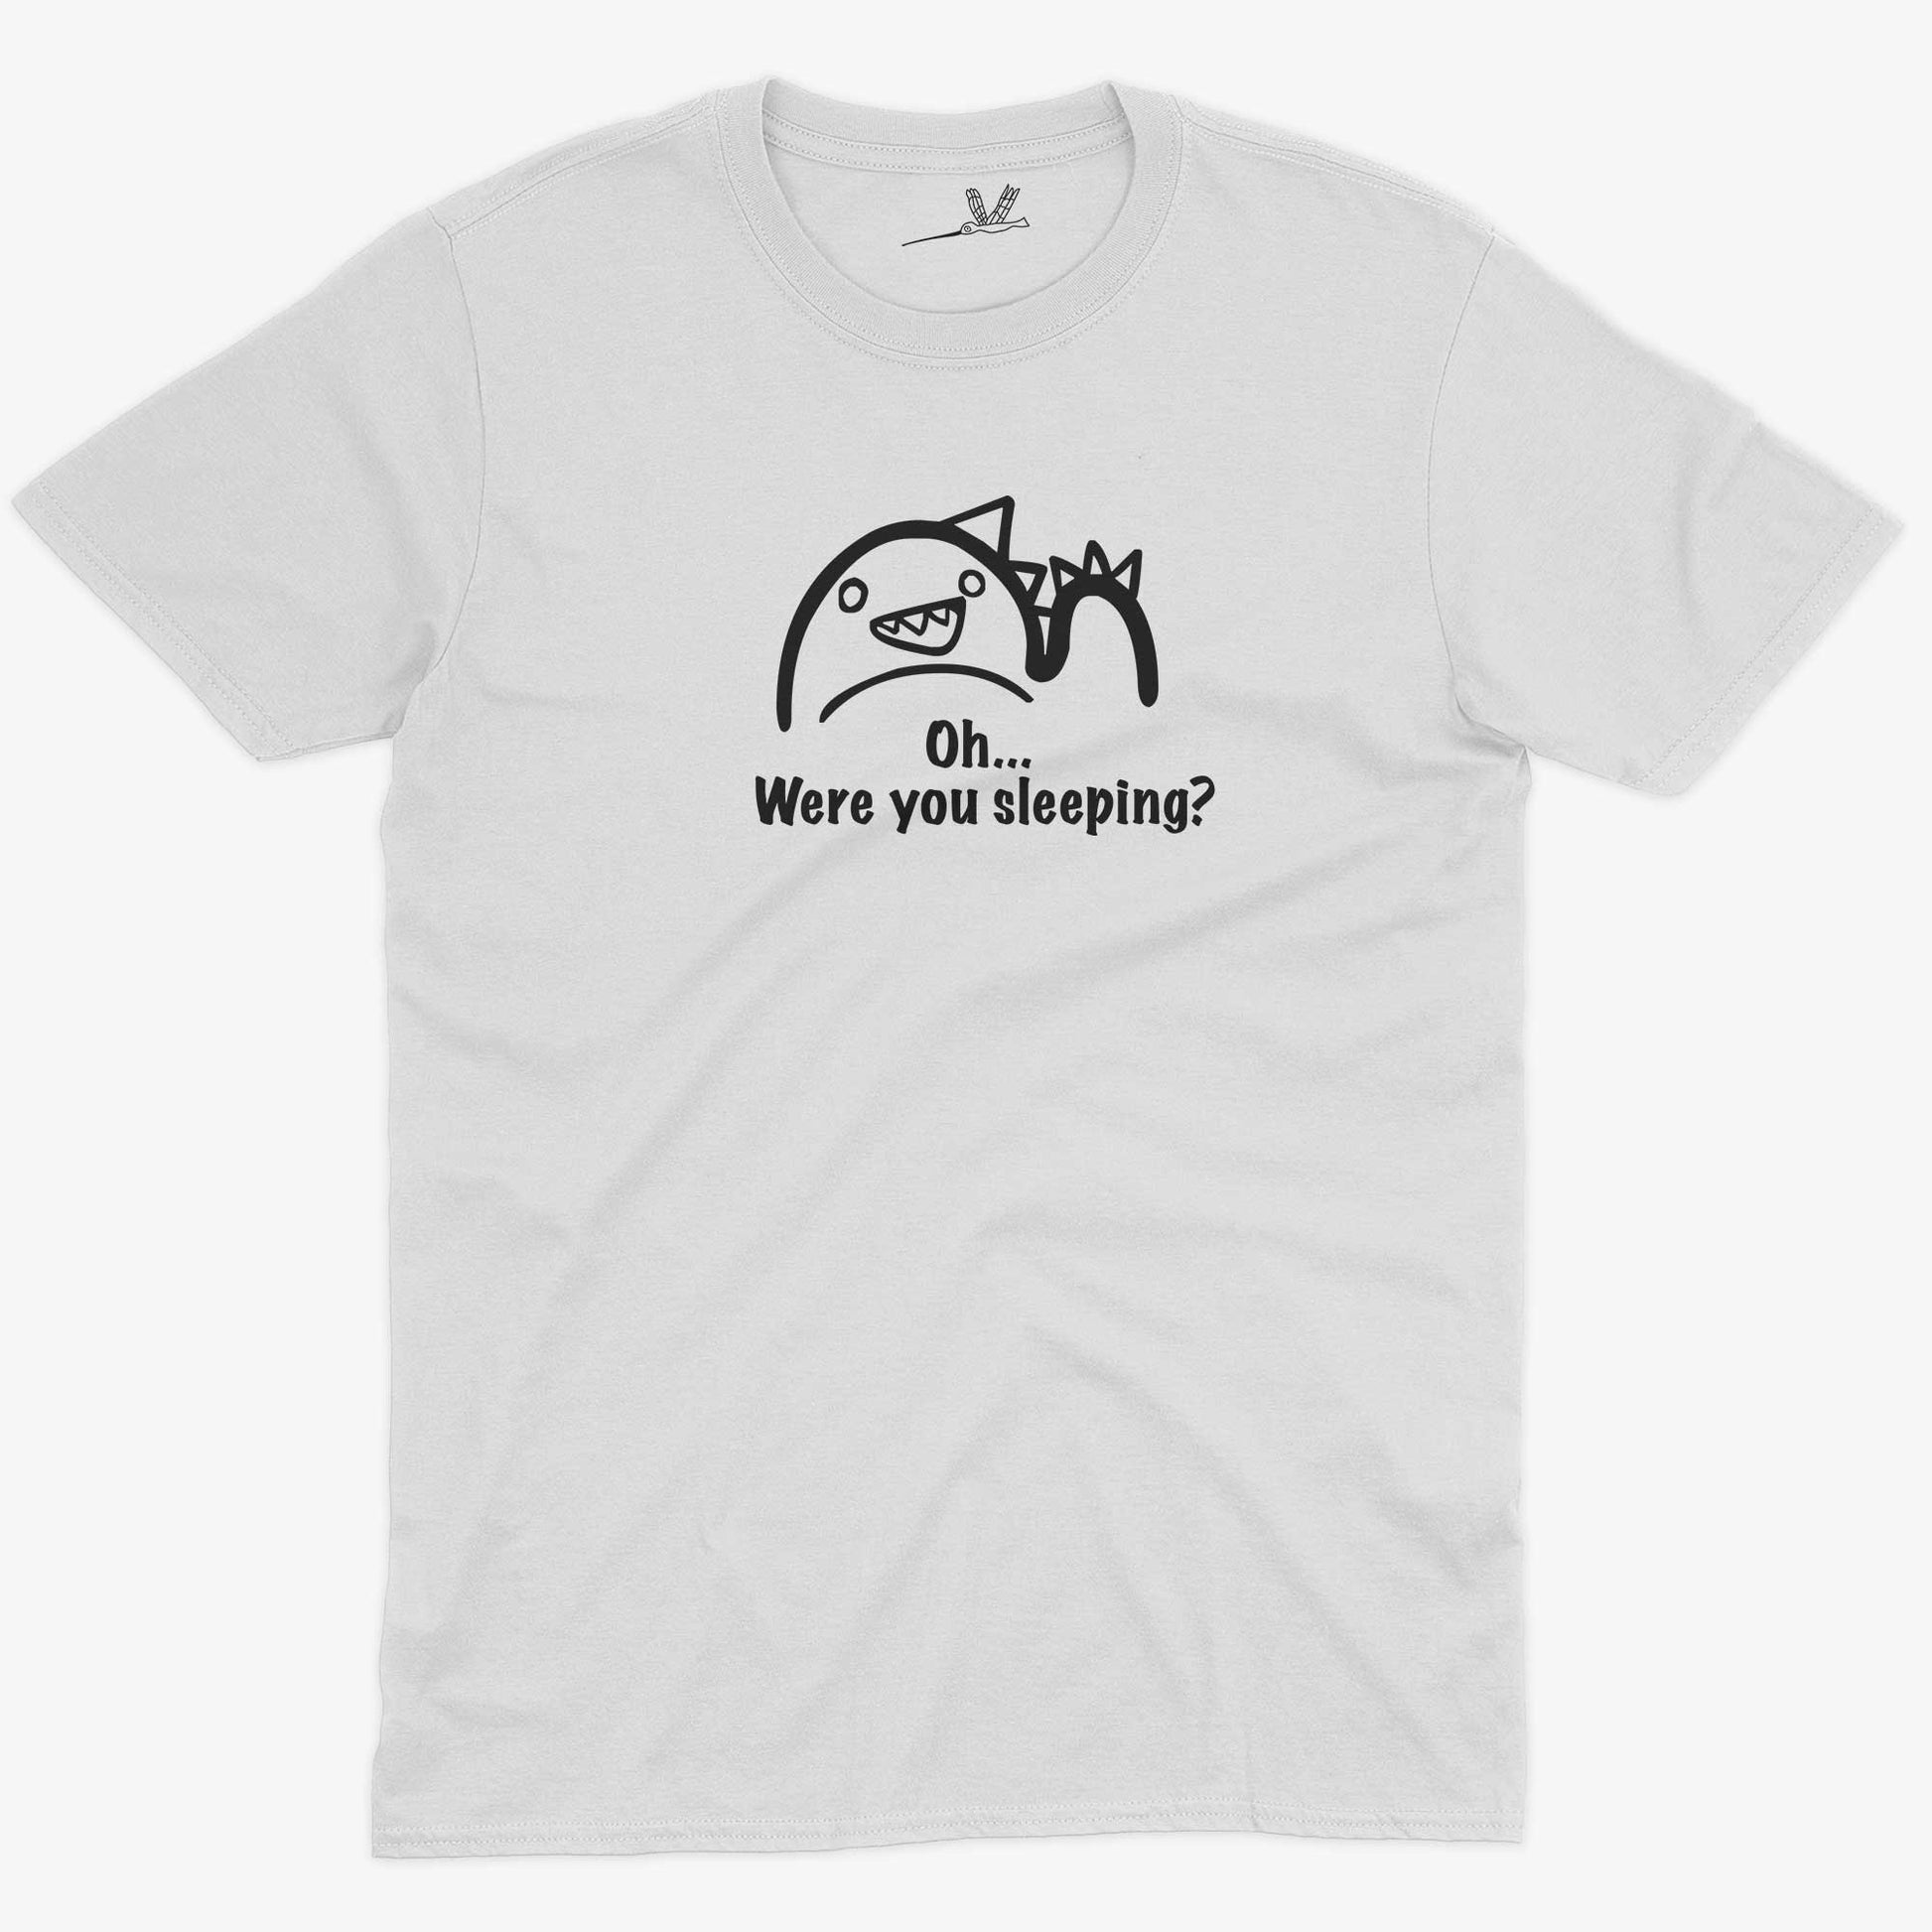 Oh...Were you sleeping? Women's or Unisex Funny T-shirt-White-Unisex